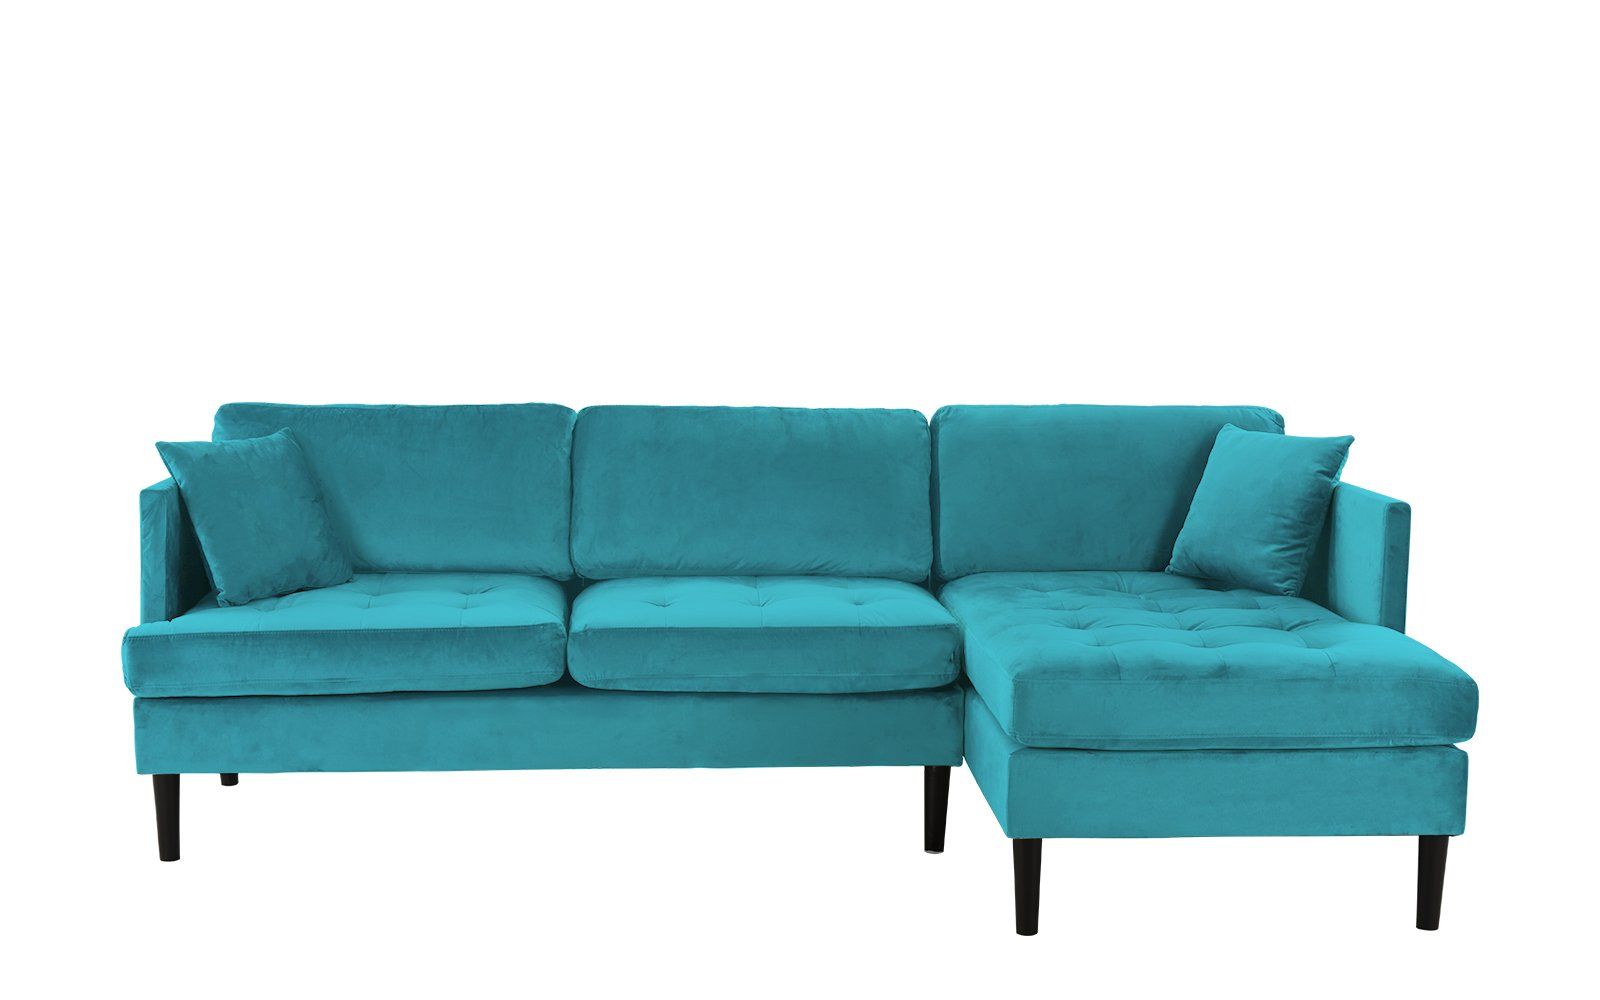 Mid Century Modern Tufted Velvet Sectional Sofa, Classic L With Regard To Dulce Mid Century Chaise Sofas Dark Blue (View 3 of 15)